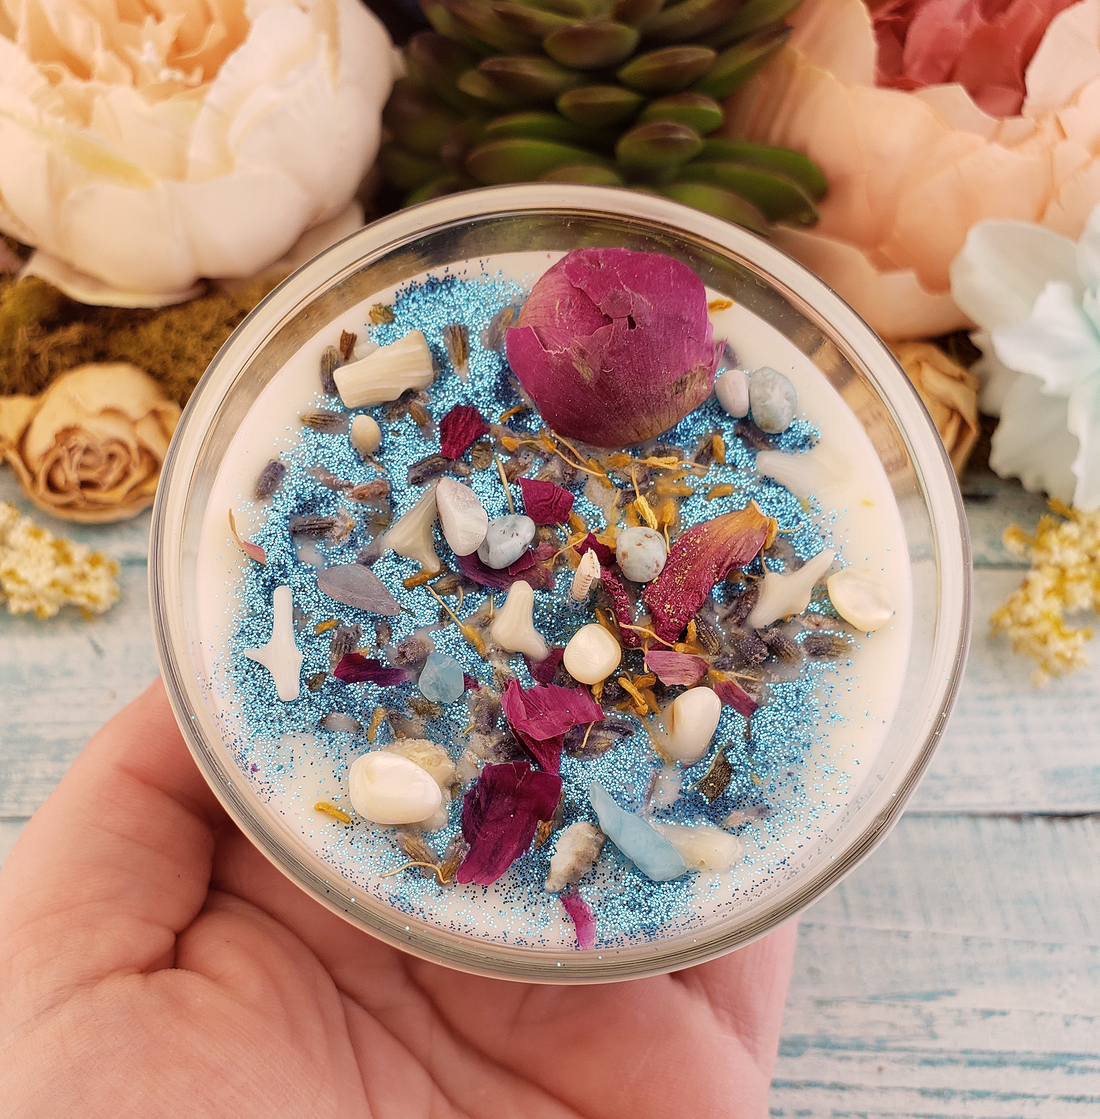 Pure Blessings - Coconut Soy Wax Handmade Scented Tumbler Candle - Scented with Essential Oils - Crystal Chips and Dried Herbs